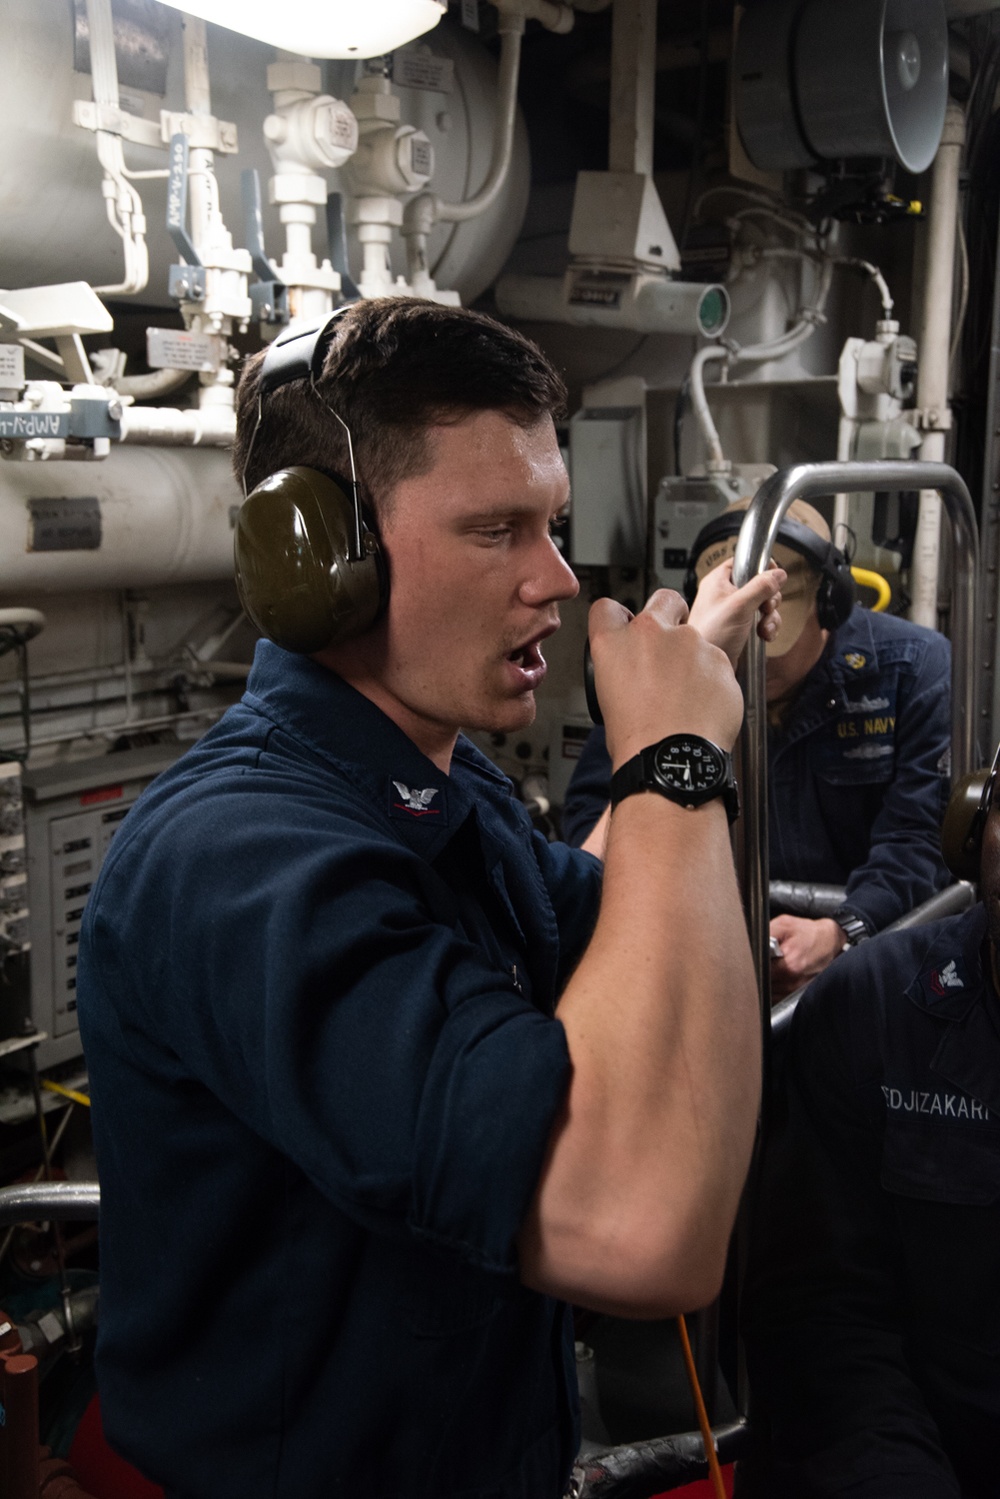 USS Chief conducts engineering drills